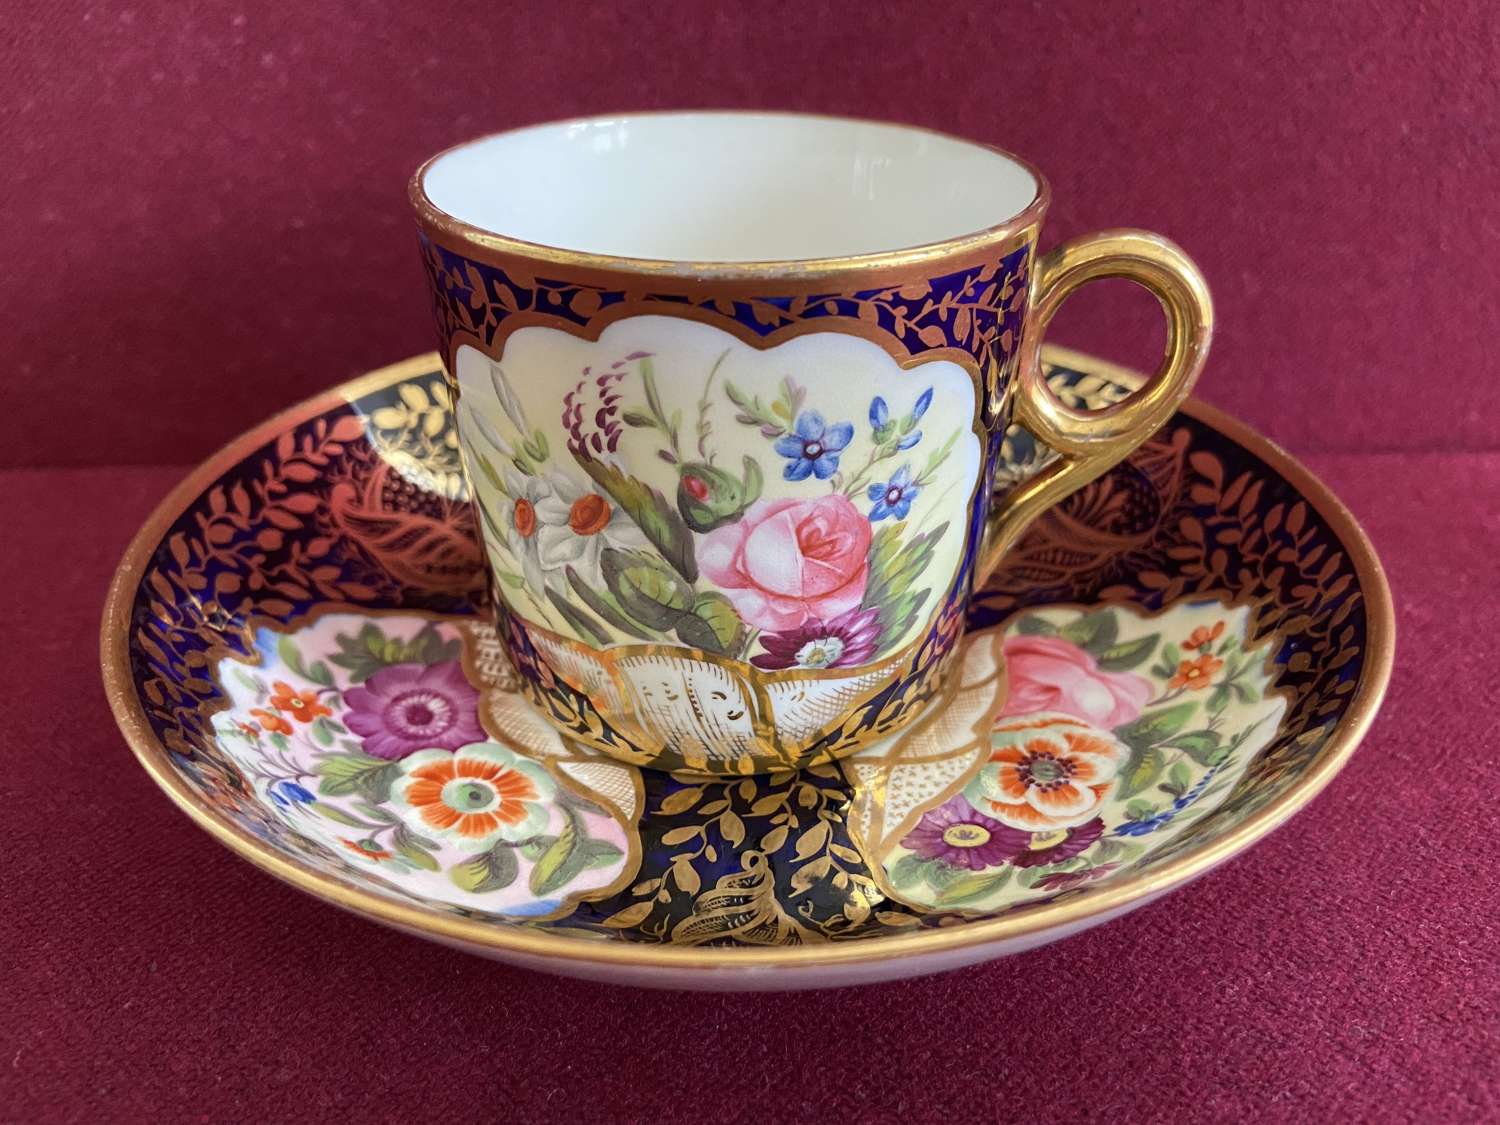 A Minton Porcelain Coffee Can & Saucer in pattern 780 c.1815